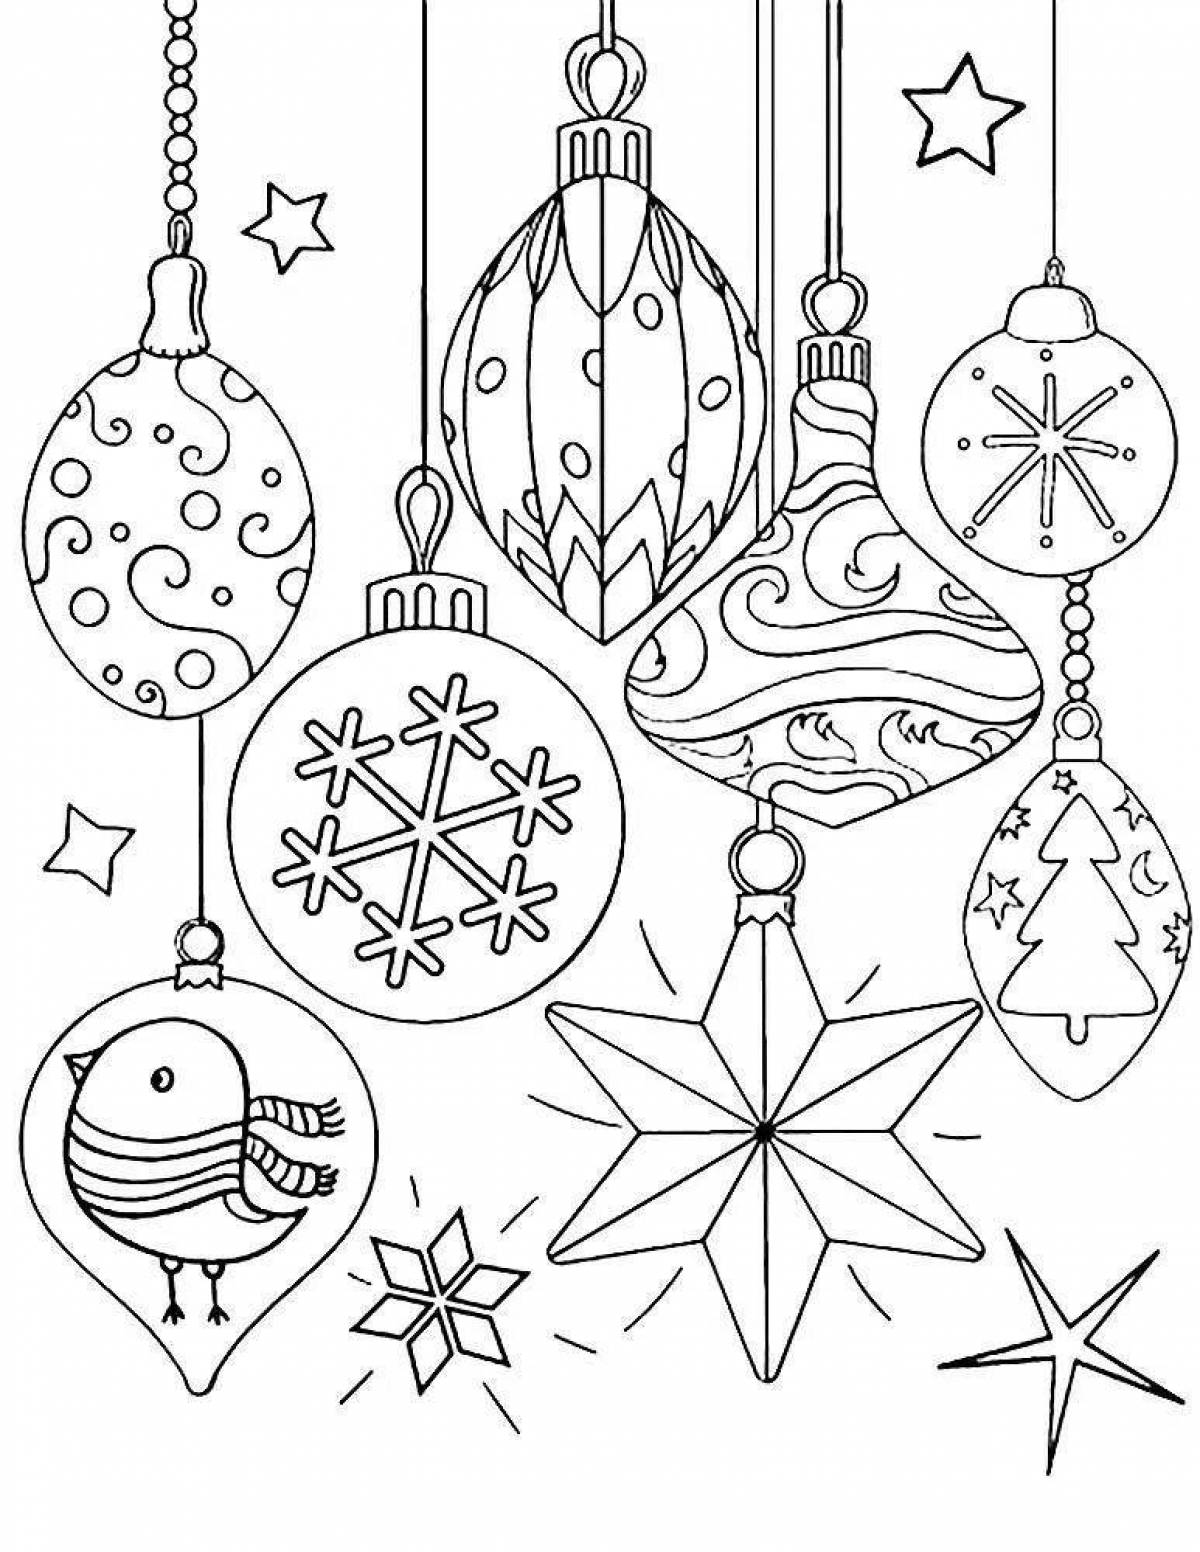 Christmas toys coloring book